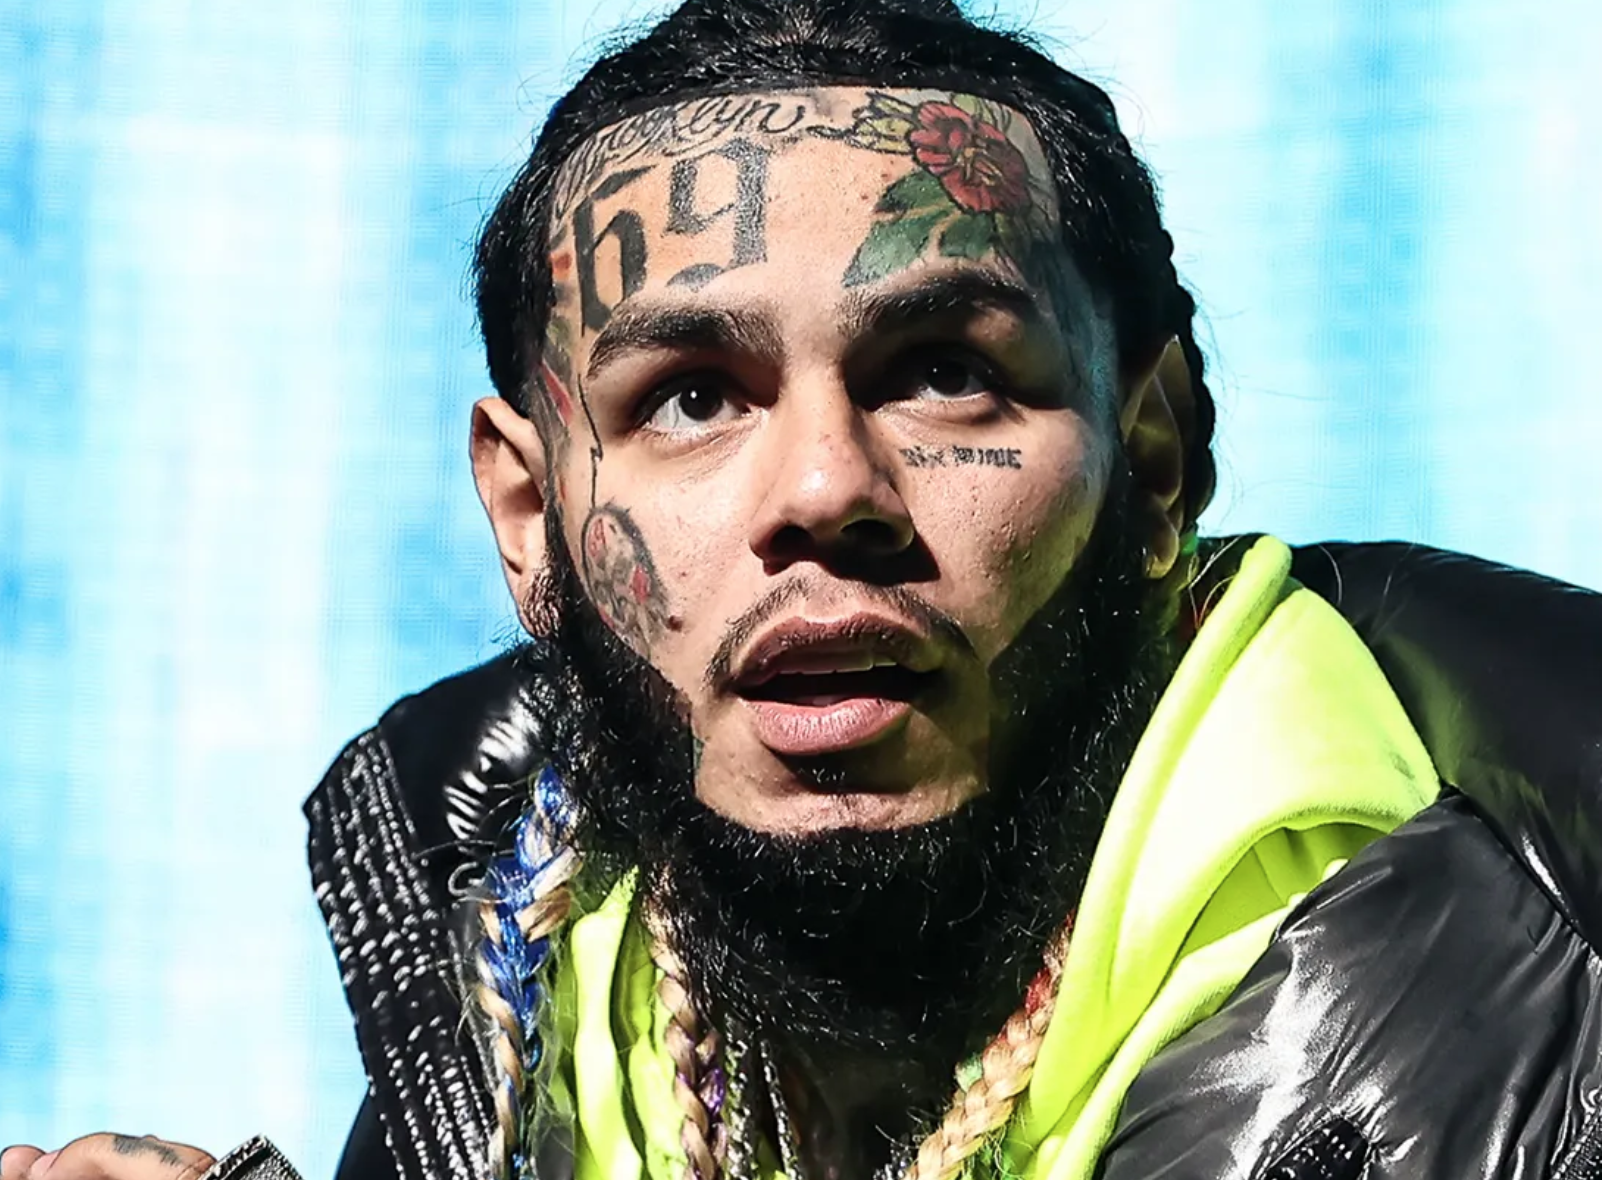 TEKASHI 6IX9INEARRESTED IN THE DOMINICAN REPUBLIC… Allegedly Assaulted Music Producers Over Girlfriend